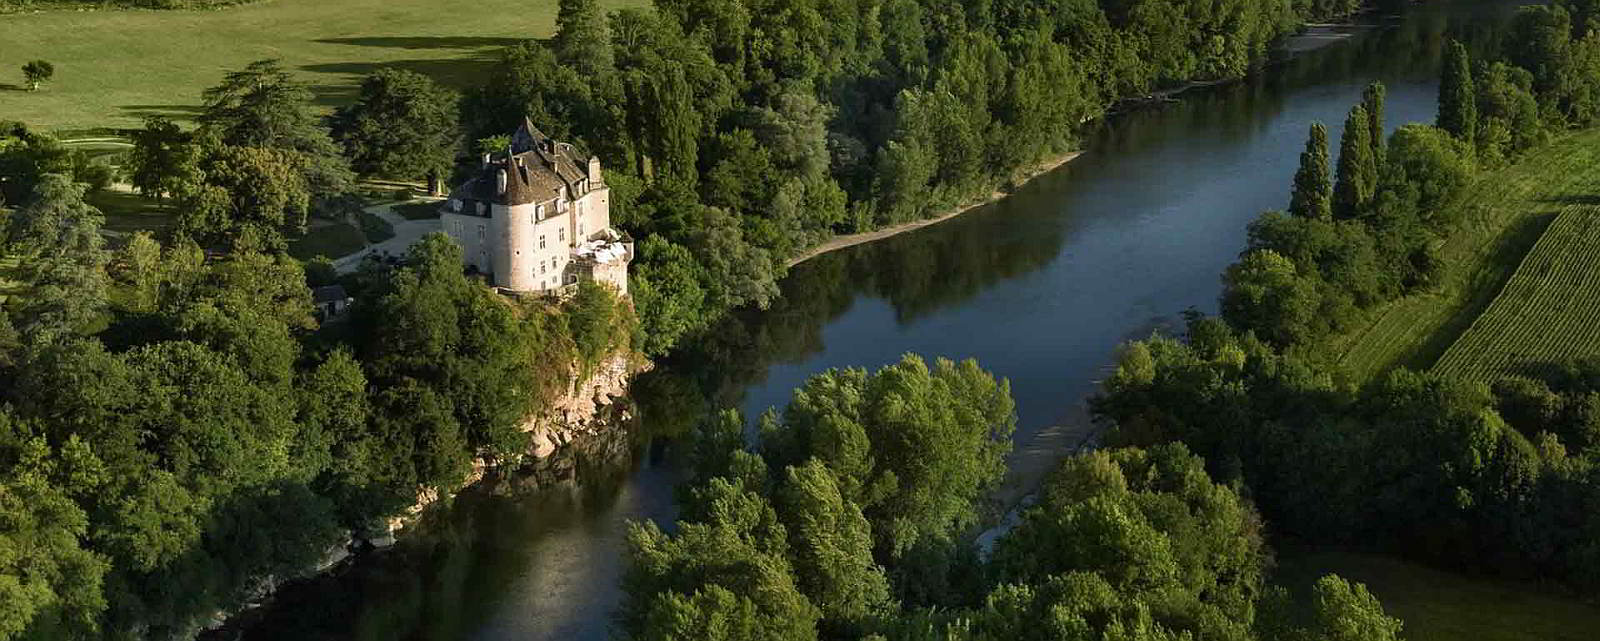 Occitanie Dordogne 5-star Hotel picture. Occitanie Luxury Holidays with In-Luxe Travel France, The specialist of luxury bespoke holidays in France since 2007